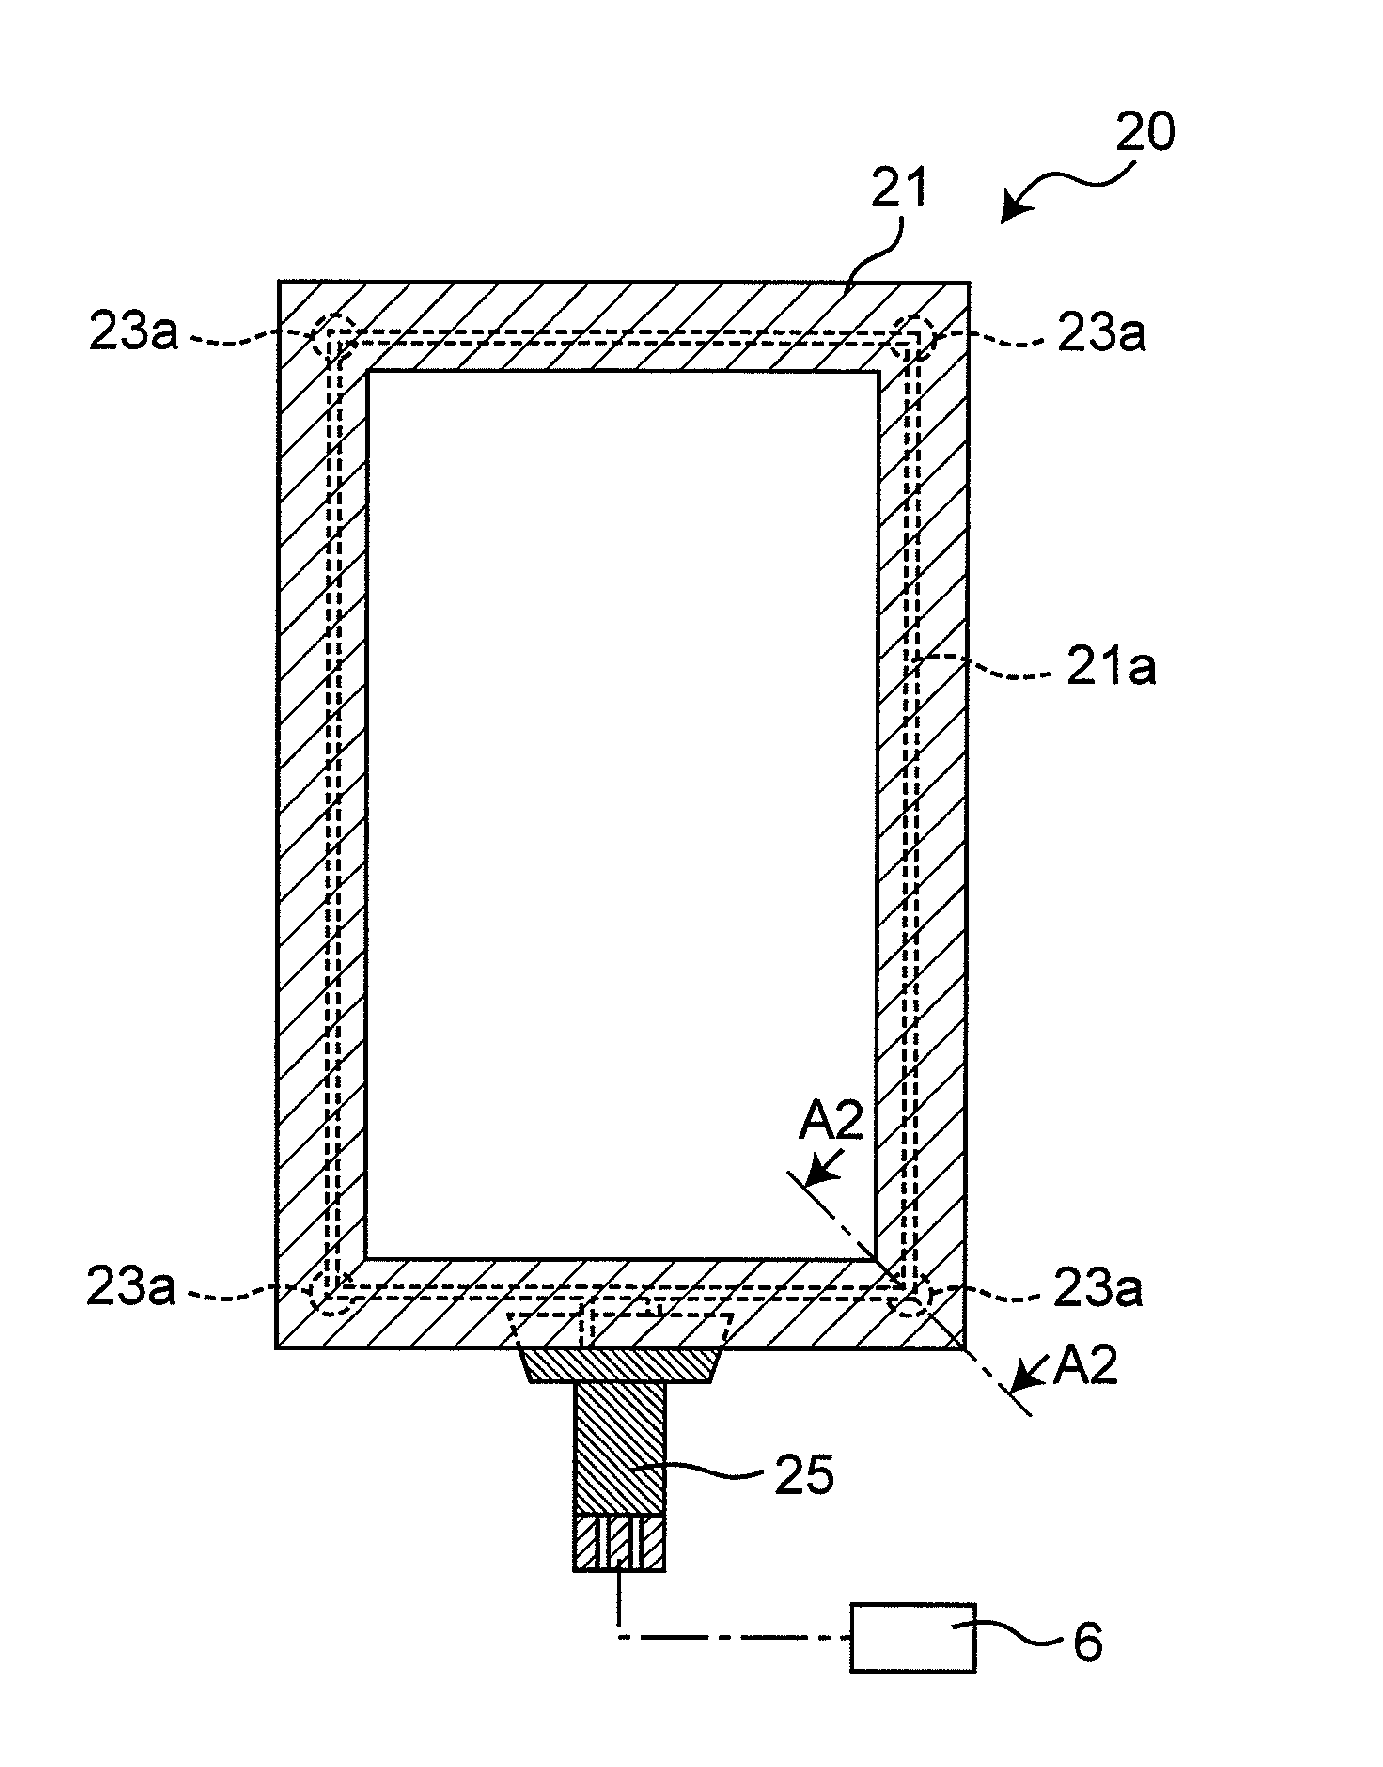 Touch panel having press detection function and pressure sensitive sensor for the touch panel